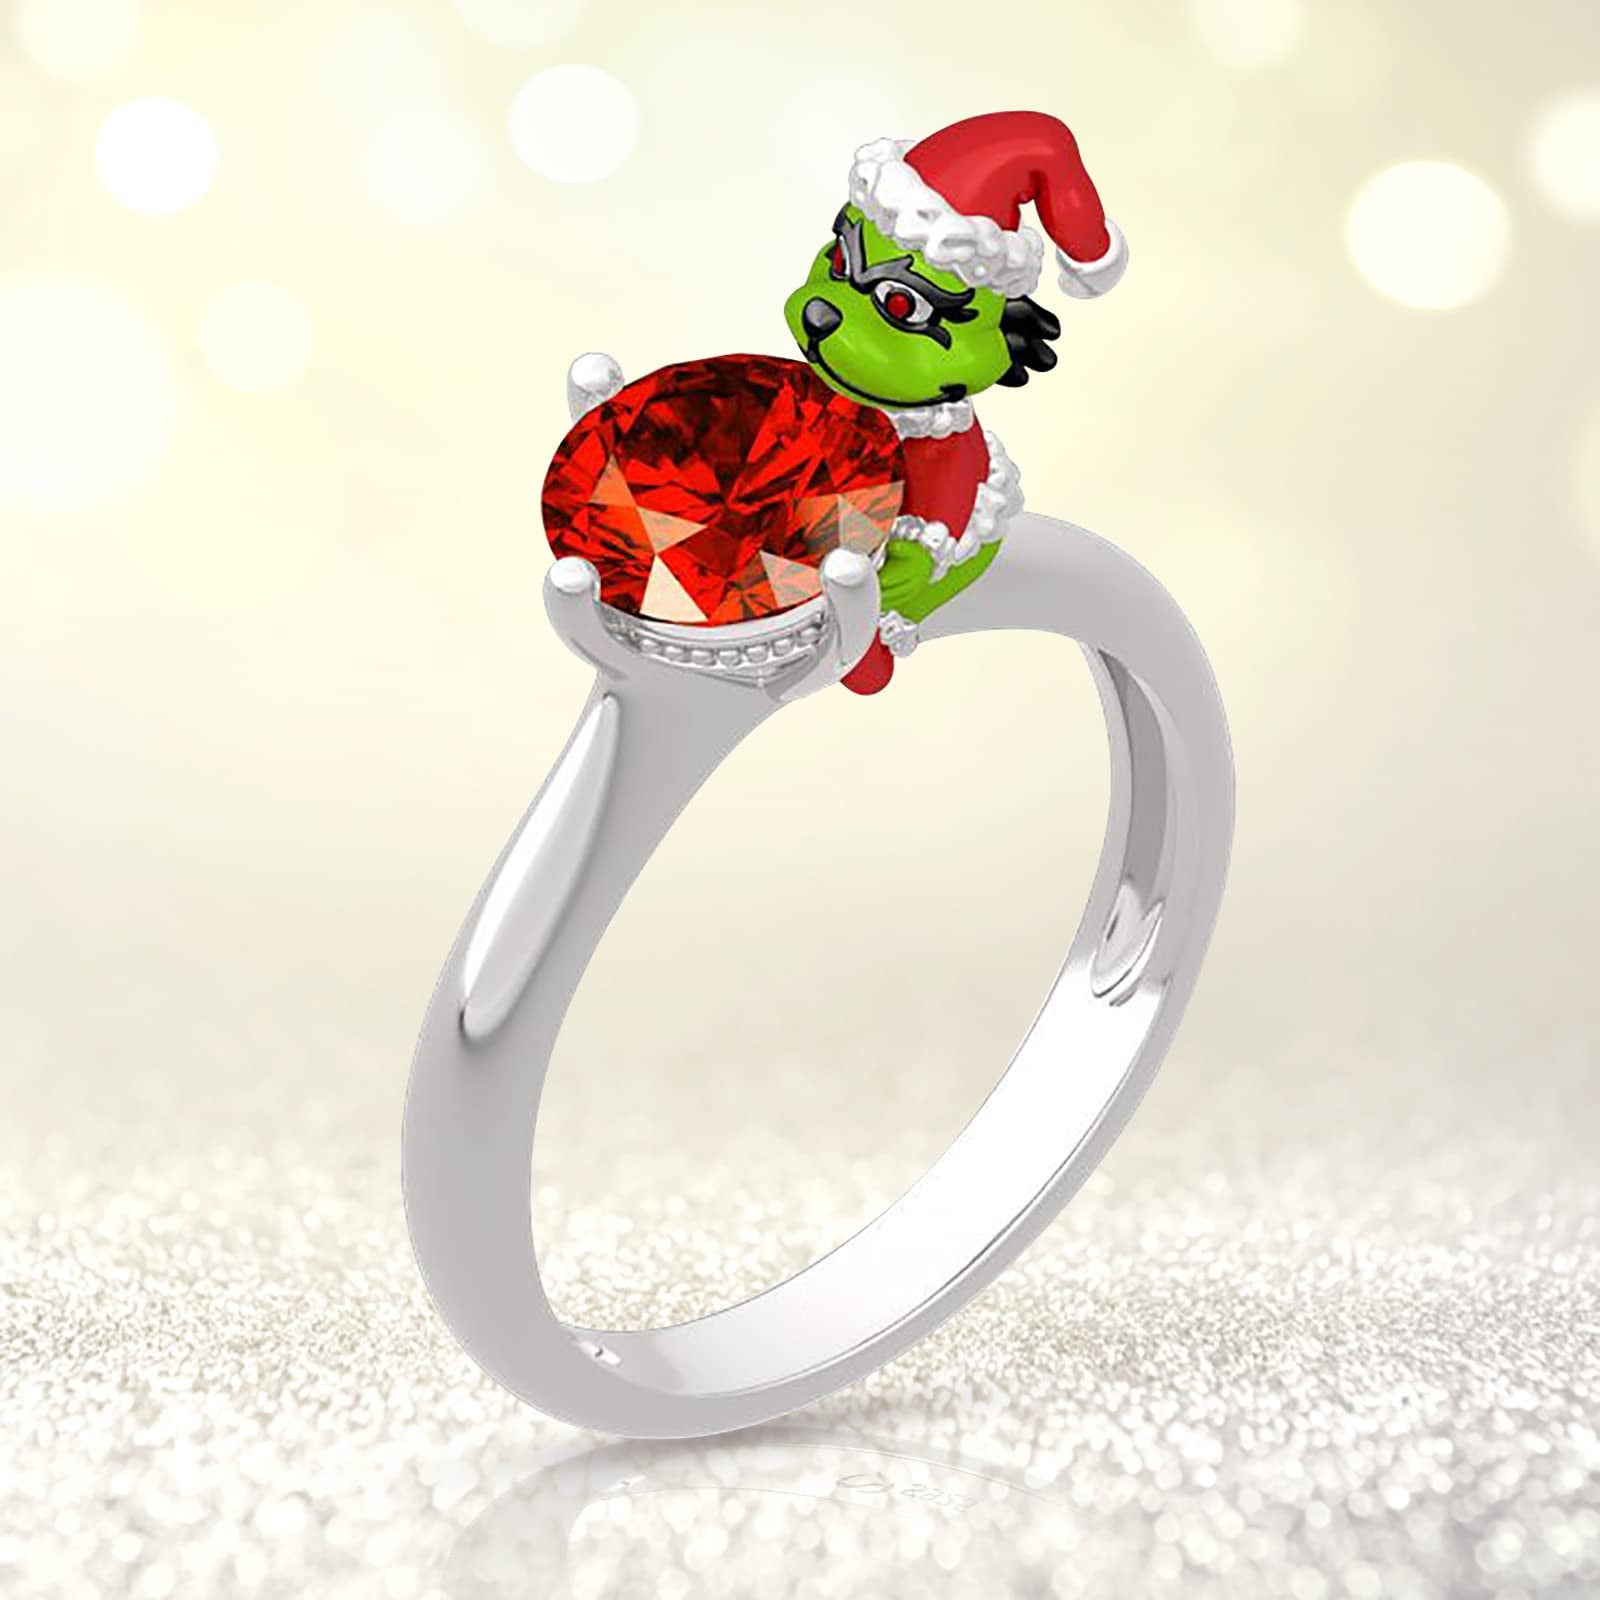 SPECIAL PRICES - Christmas Grinch Jewelry (3 Options Available) | eBay